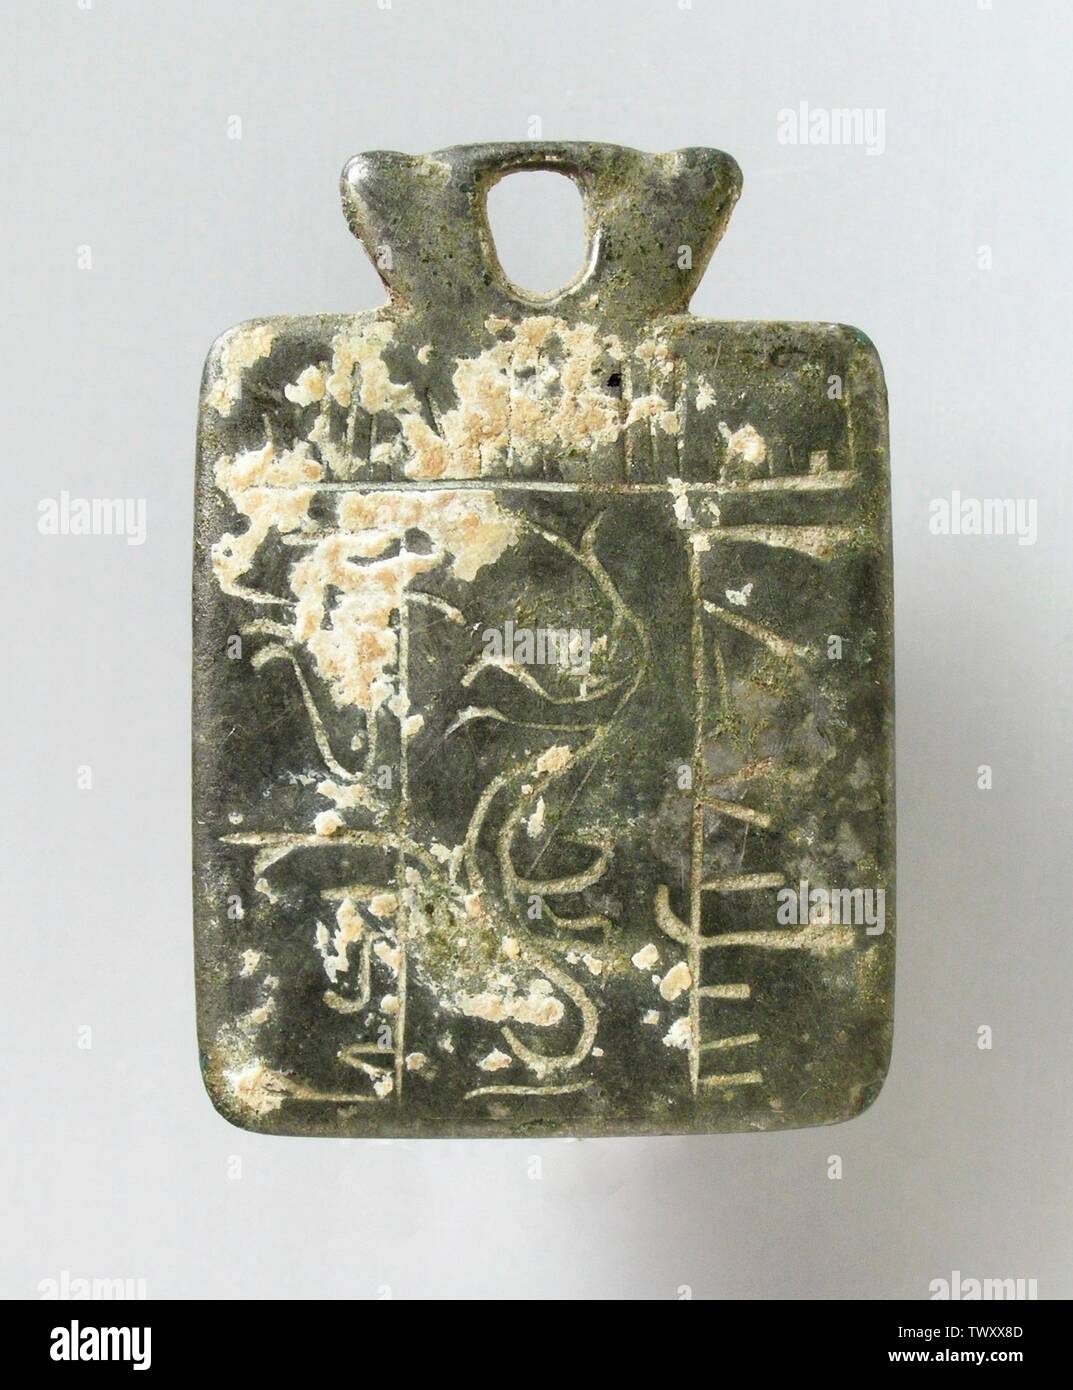 Amulet (image 1 of 2);  Spain, early Islamic, 8th-10th century Jewelry and Adornments; amulets Bronze The Madina Collection of Islamic Art, gift of Camilla Chandler Frost (M.2002.1.639) Islamic Art; 8th-10th century; Stock Photo